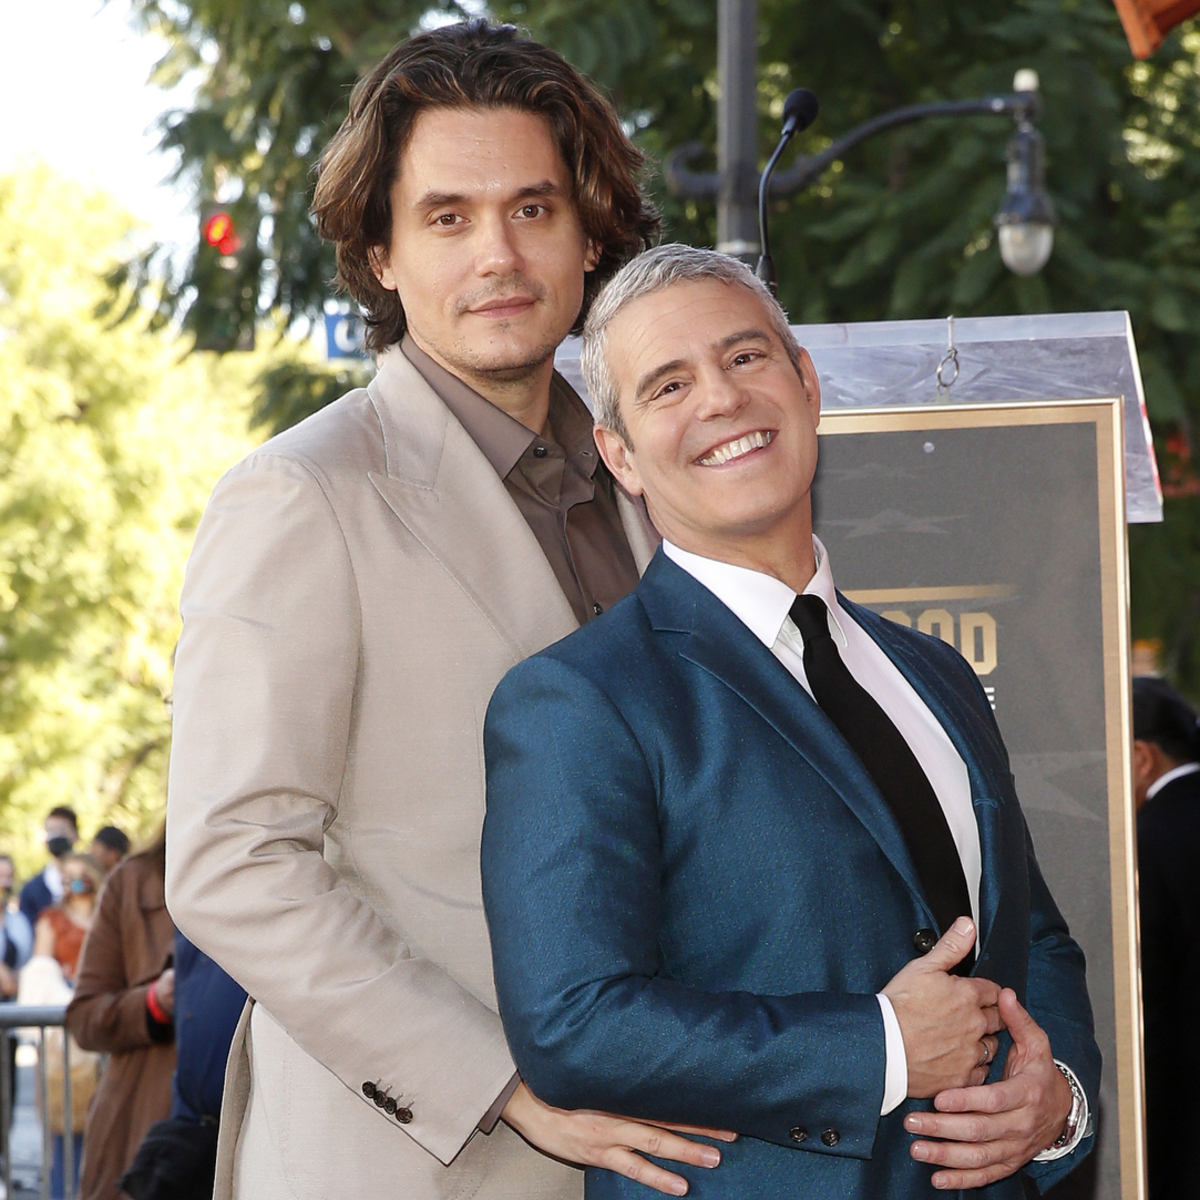 Andy Cohen Reacts to John Mayer Slamming Rumors About Their Friendship